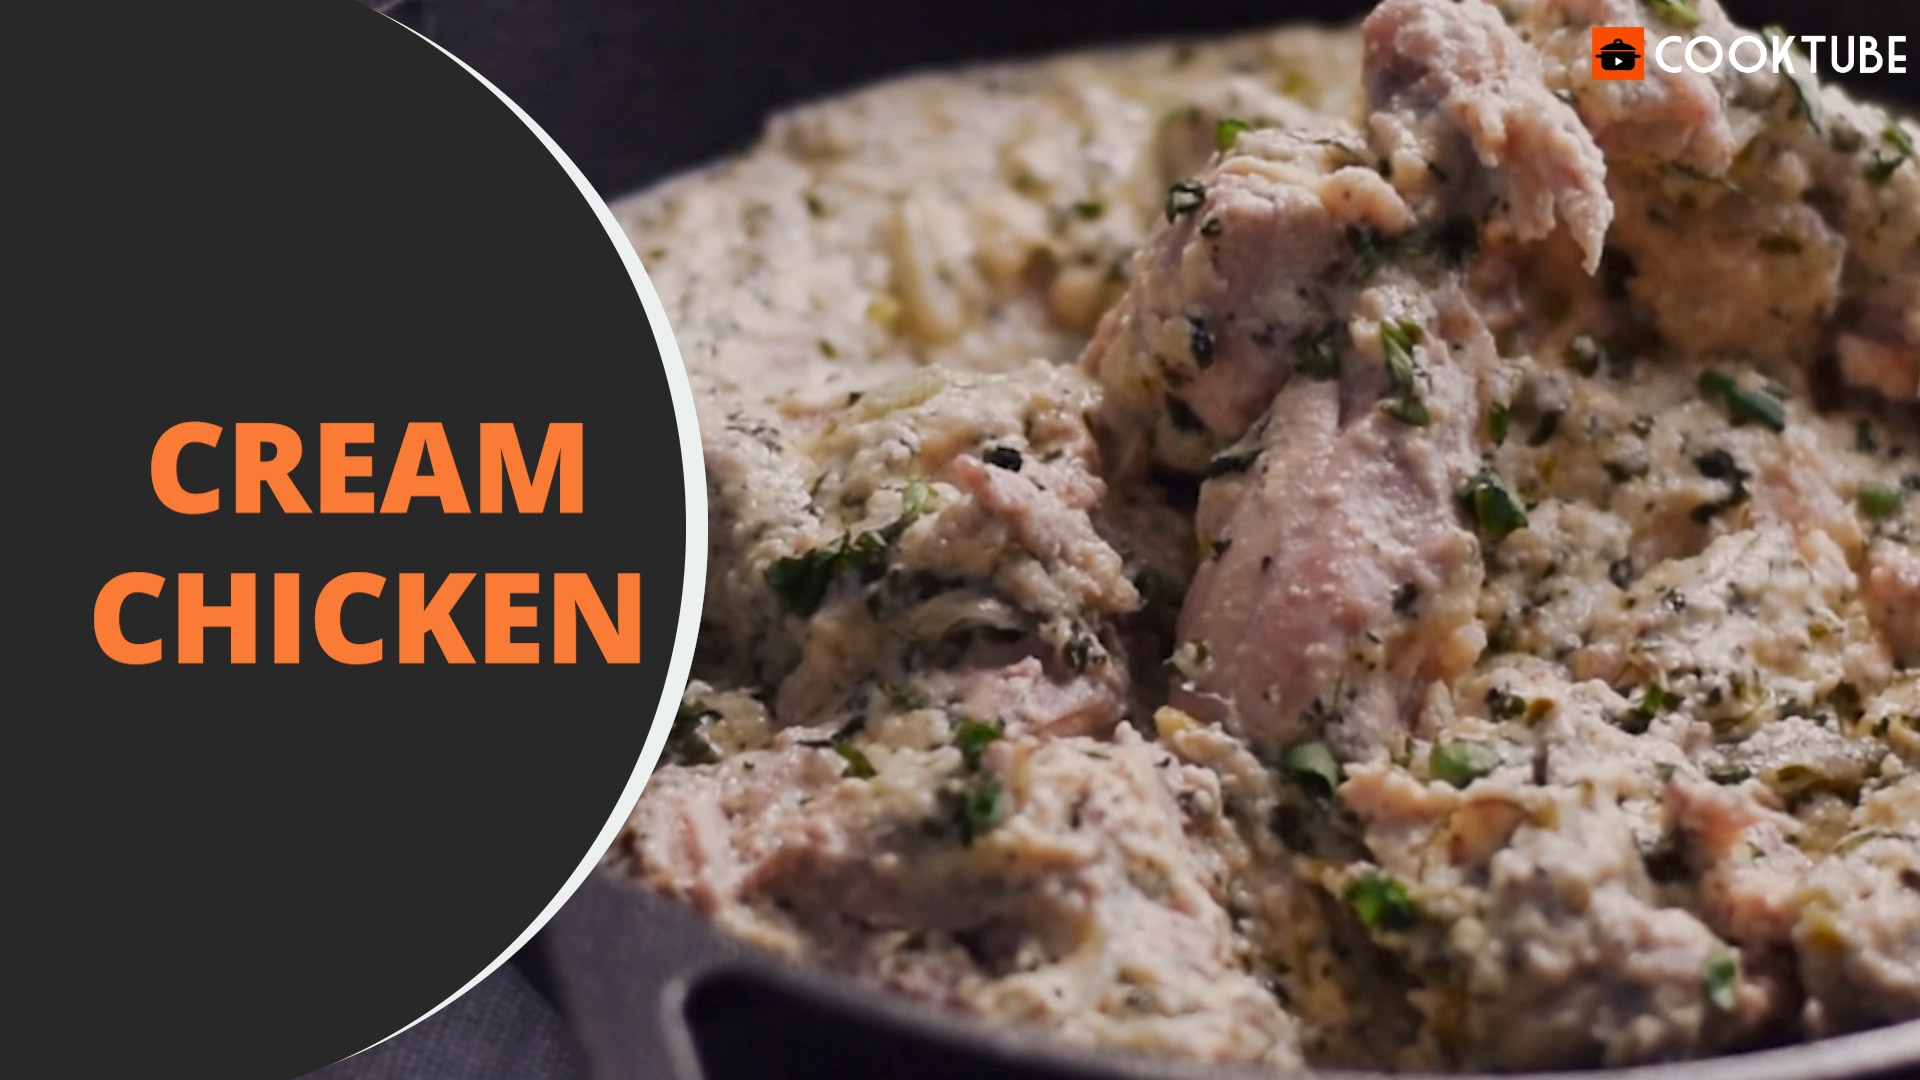 How to Make Cream Chicken at Home? Follow These Simple Steps